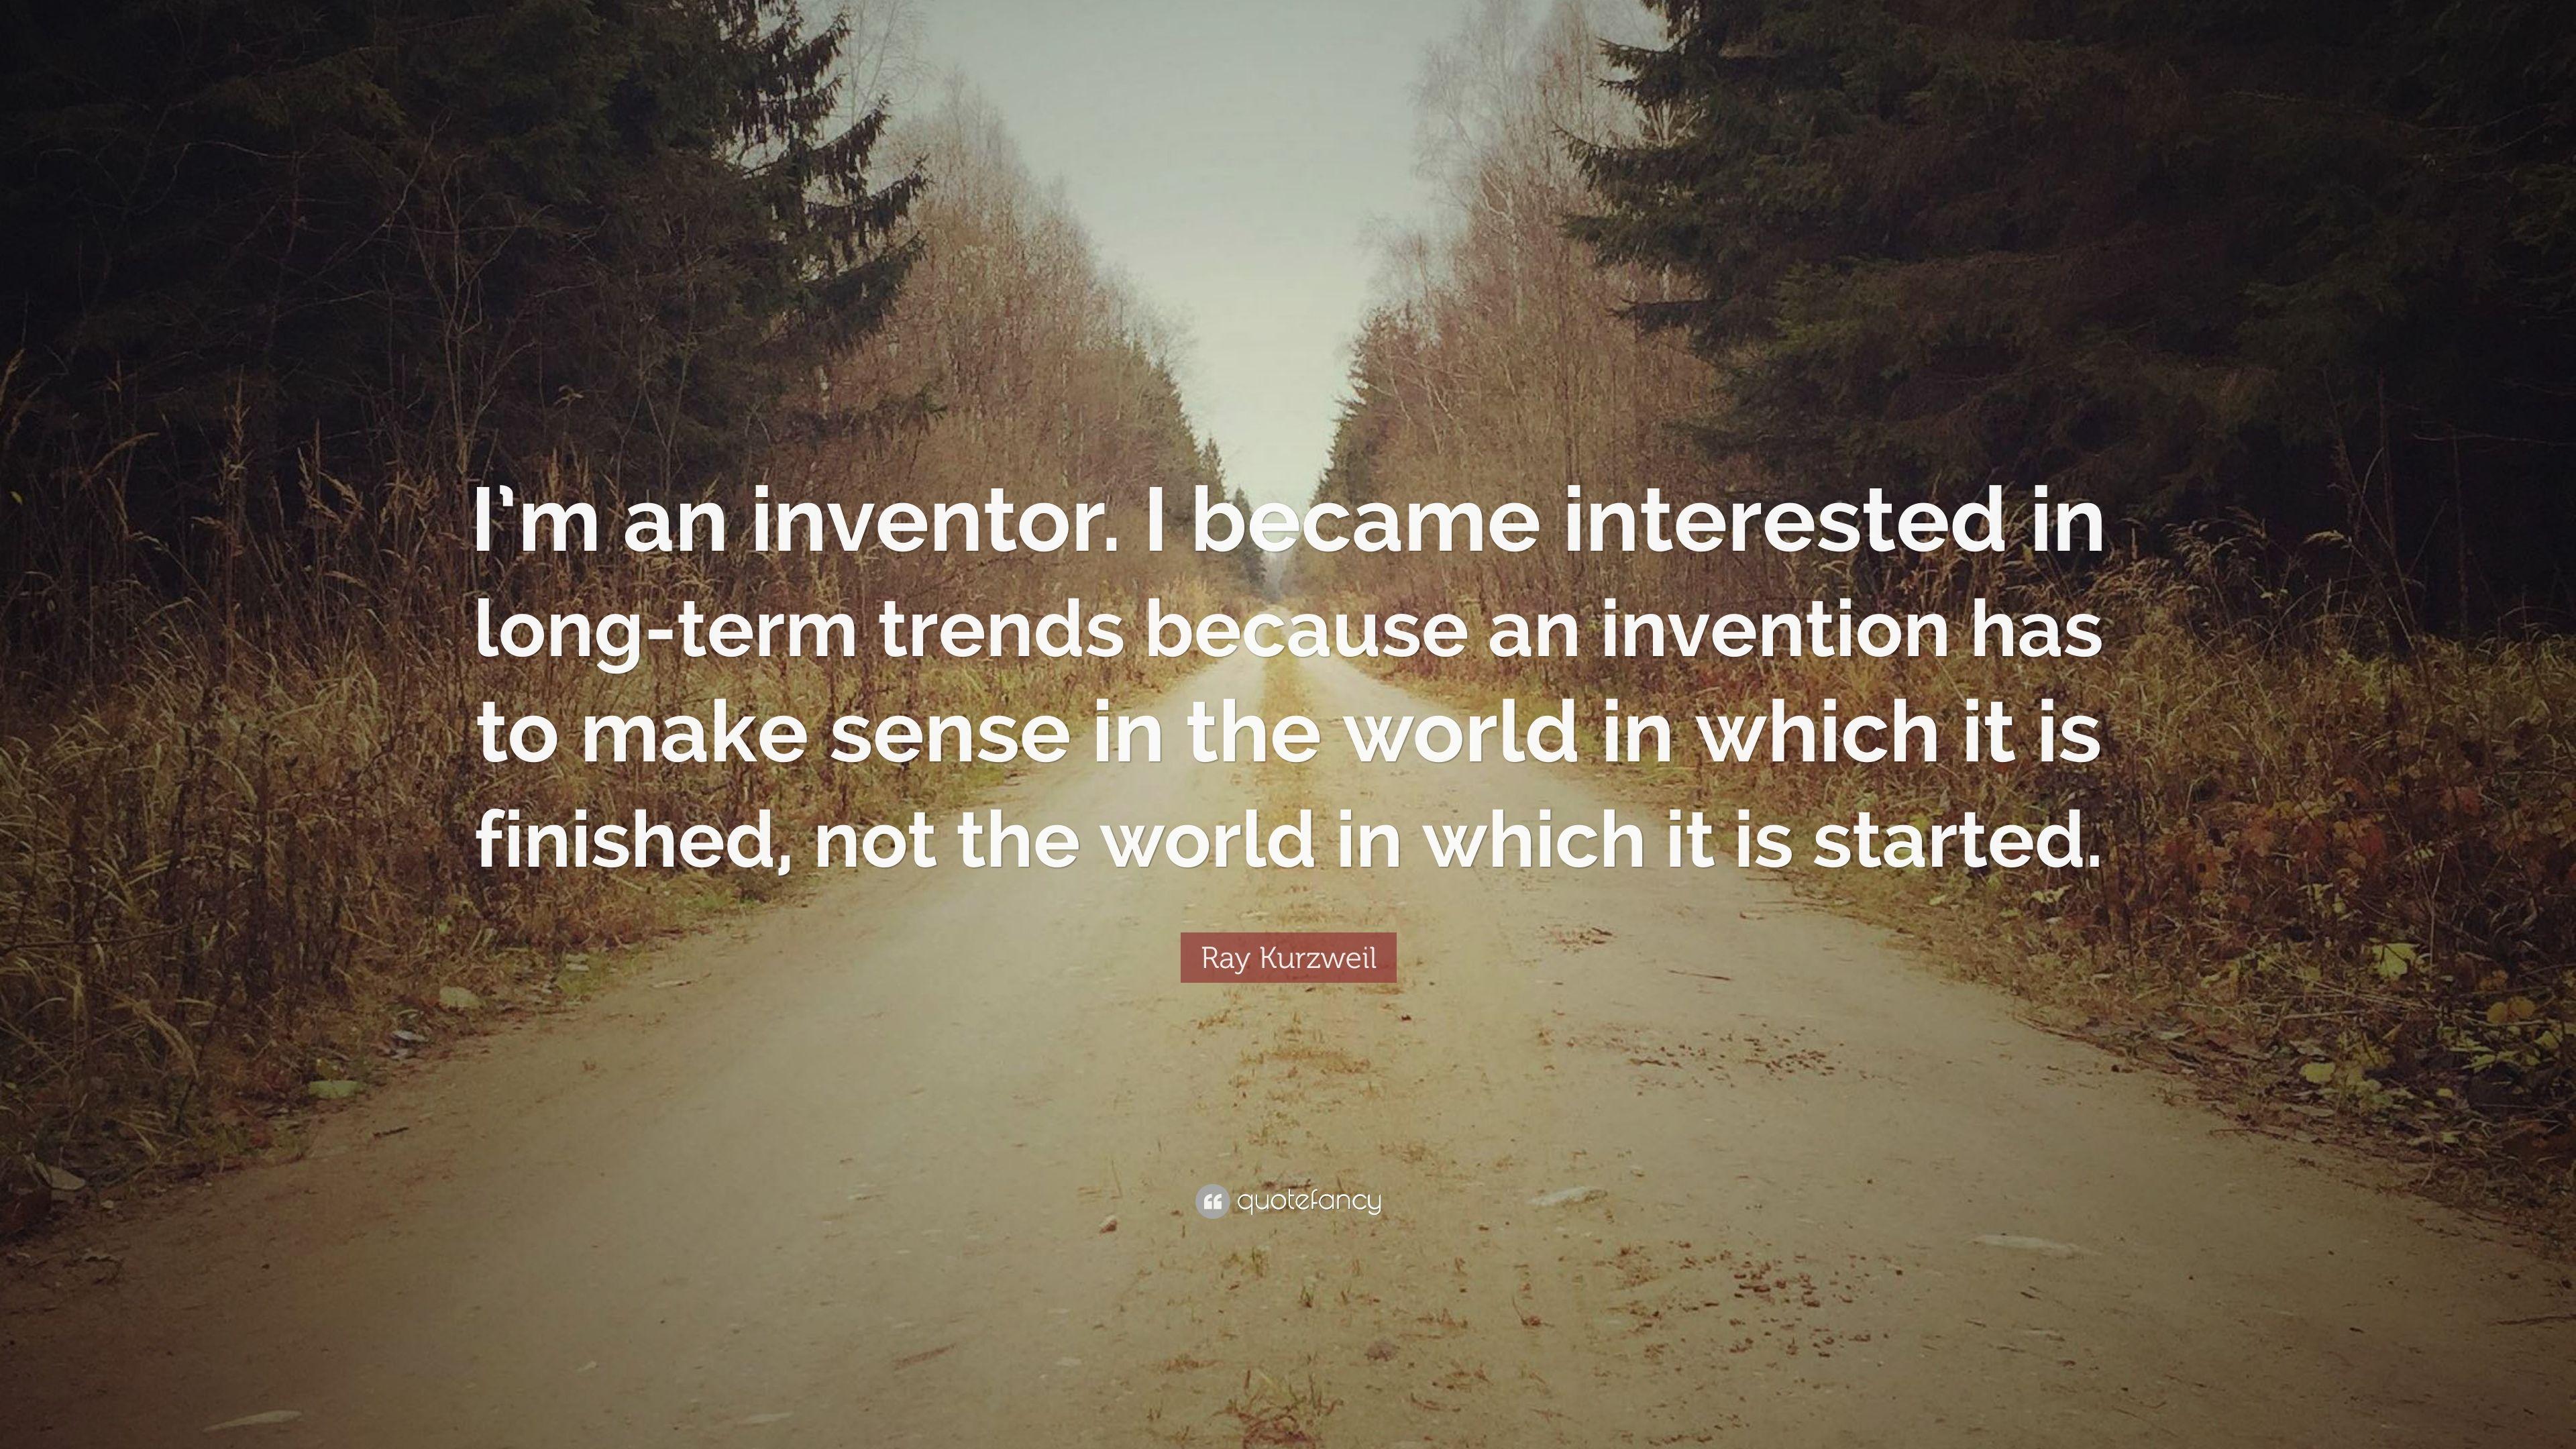 Ray Kurzweil Quote: “I'm an inventor. I became interested in long